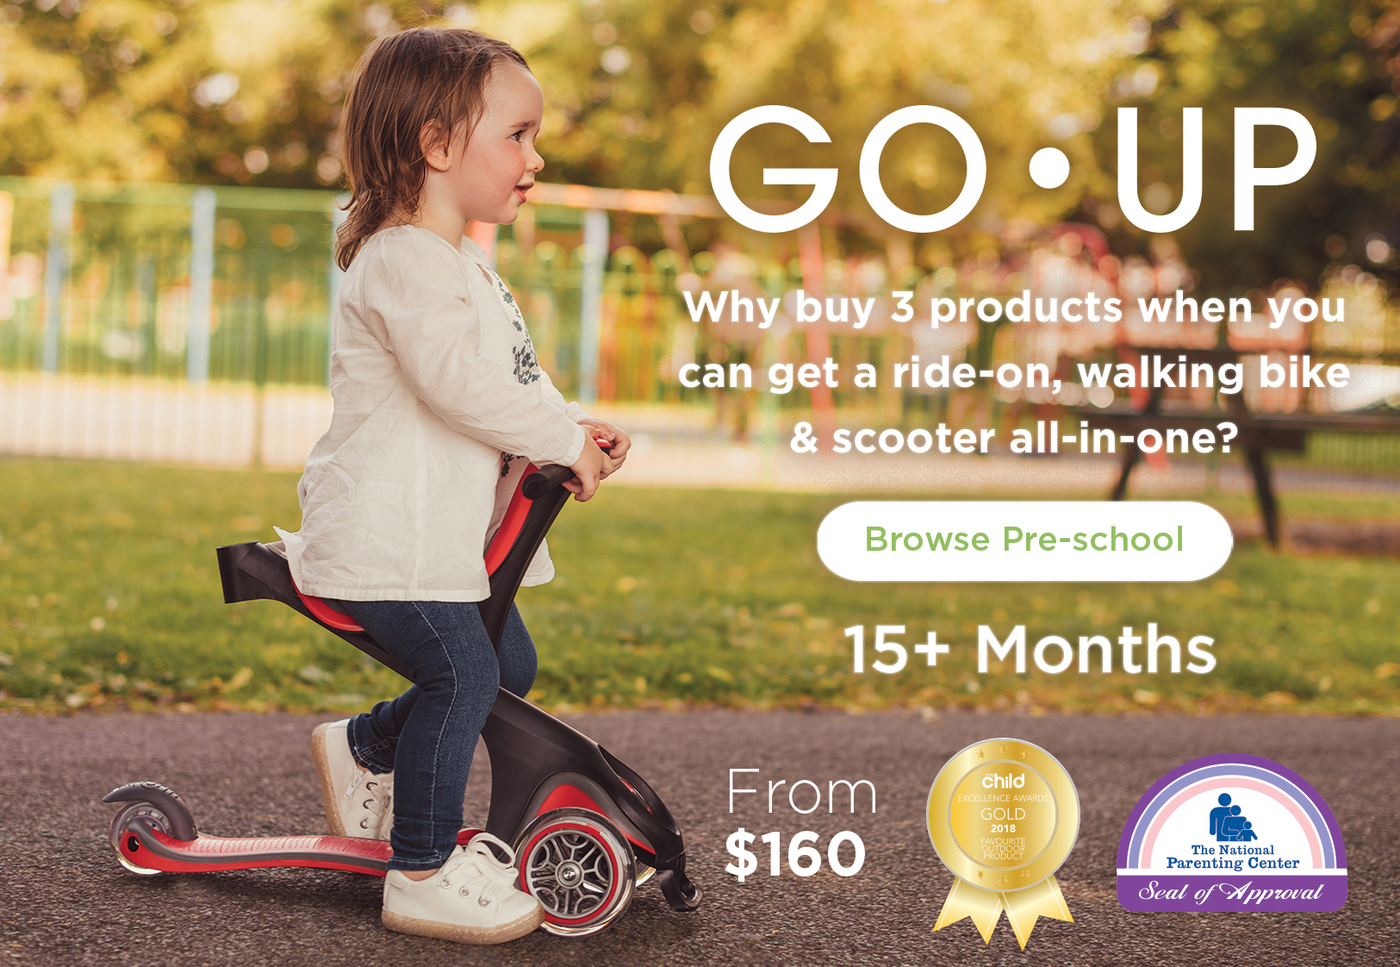 Why buy 3 products when you can get ride-on, walking bike & scooter all-in-one? 